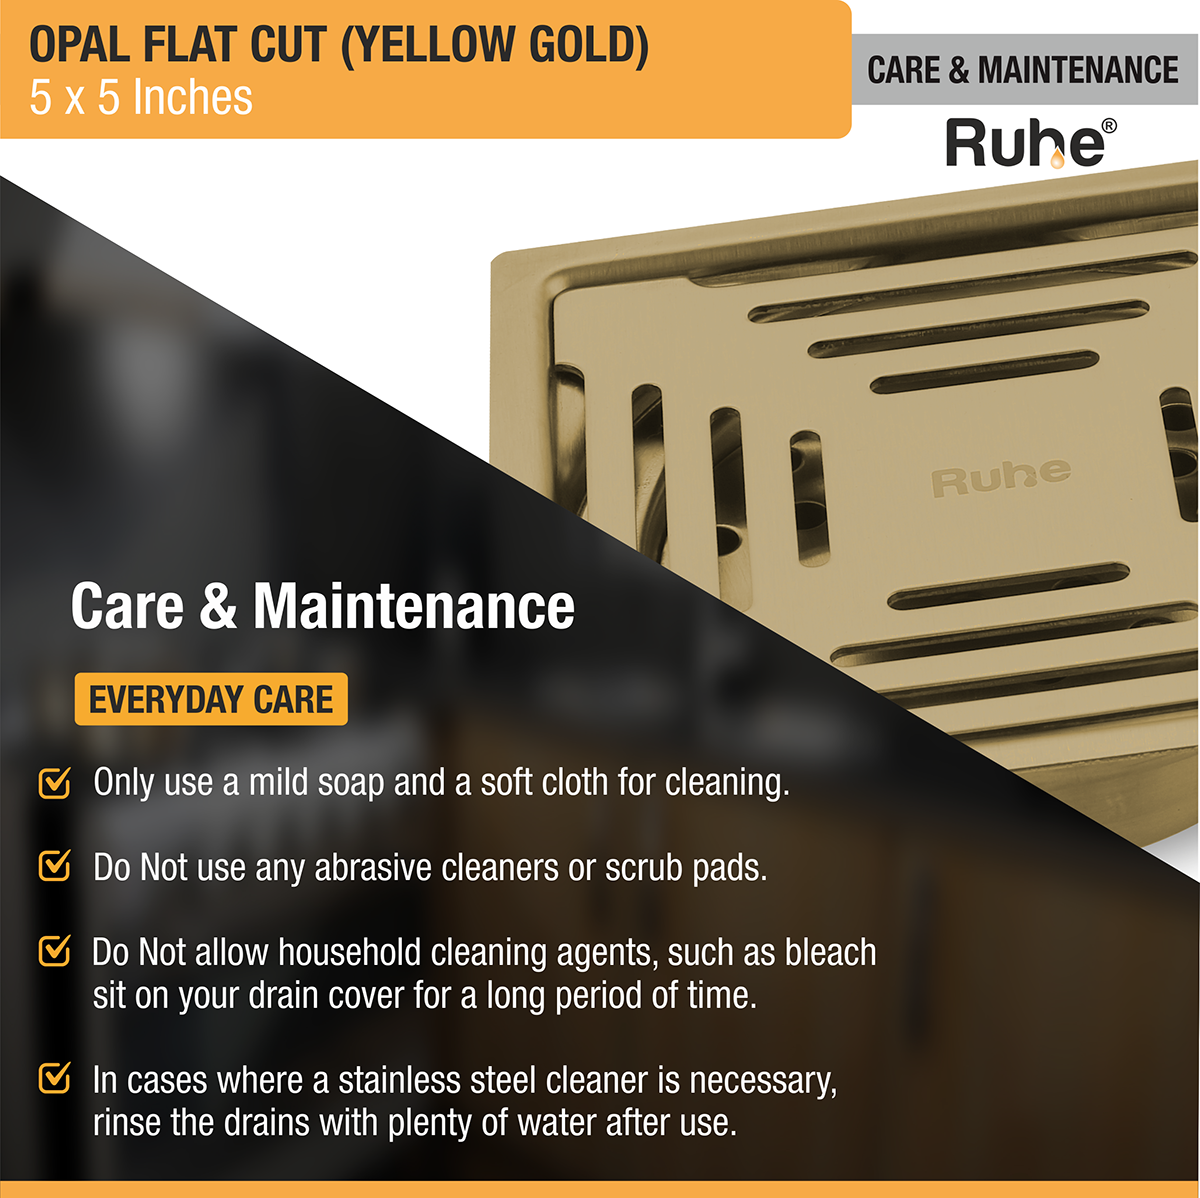 Opal Square Flat Cut Floor Drain in Yellow Gold PVD Coating (5 x 5 Inches) care and maintenance